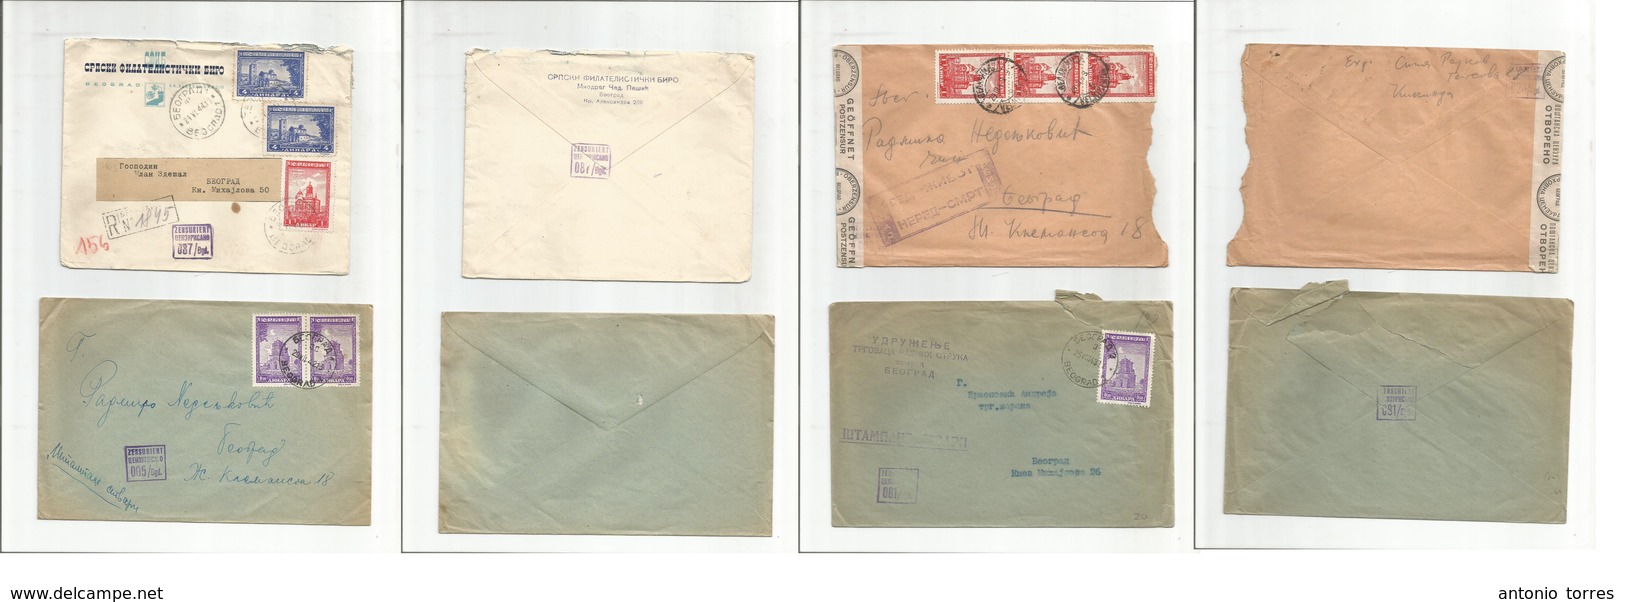 Serbia. 1942-4. Four Multiple Censor Fkd Envelopes. Diff Values And Cachets. One Is Registered, Opportunity. - Serbie